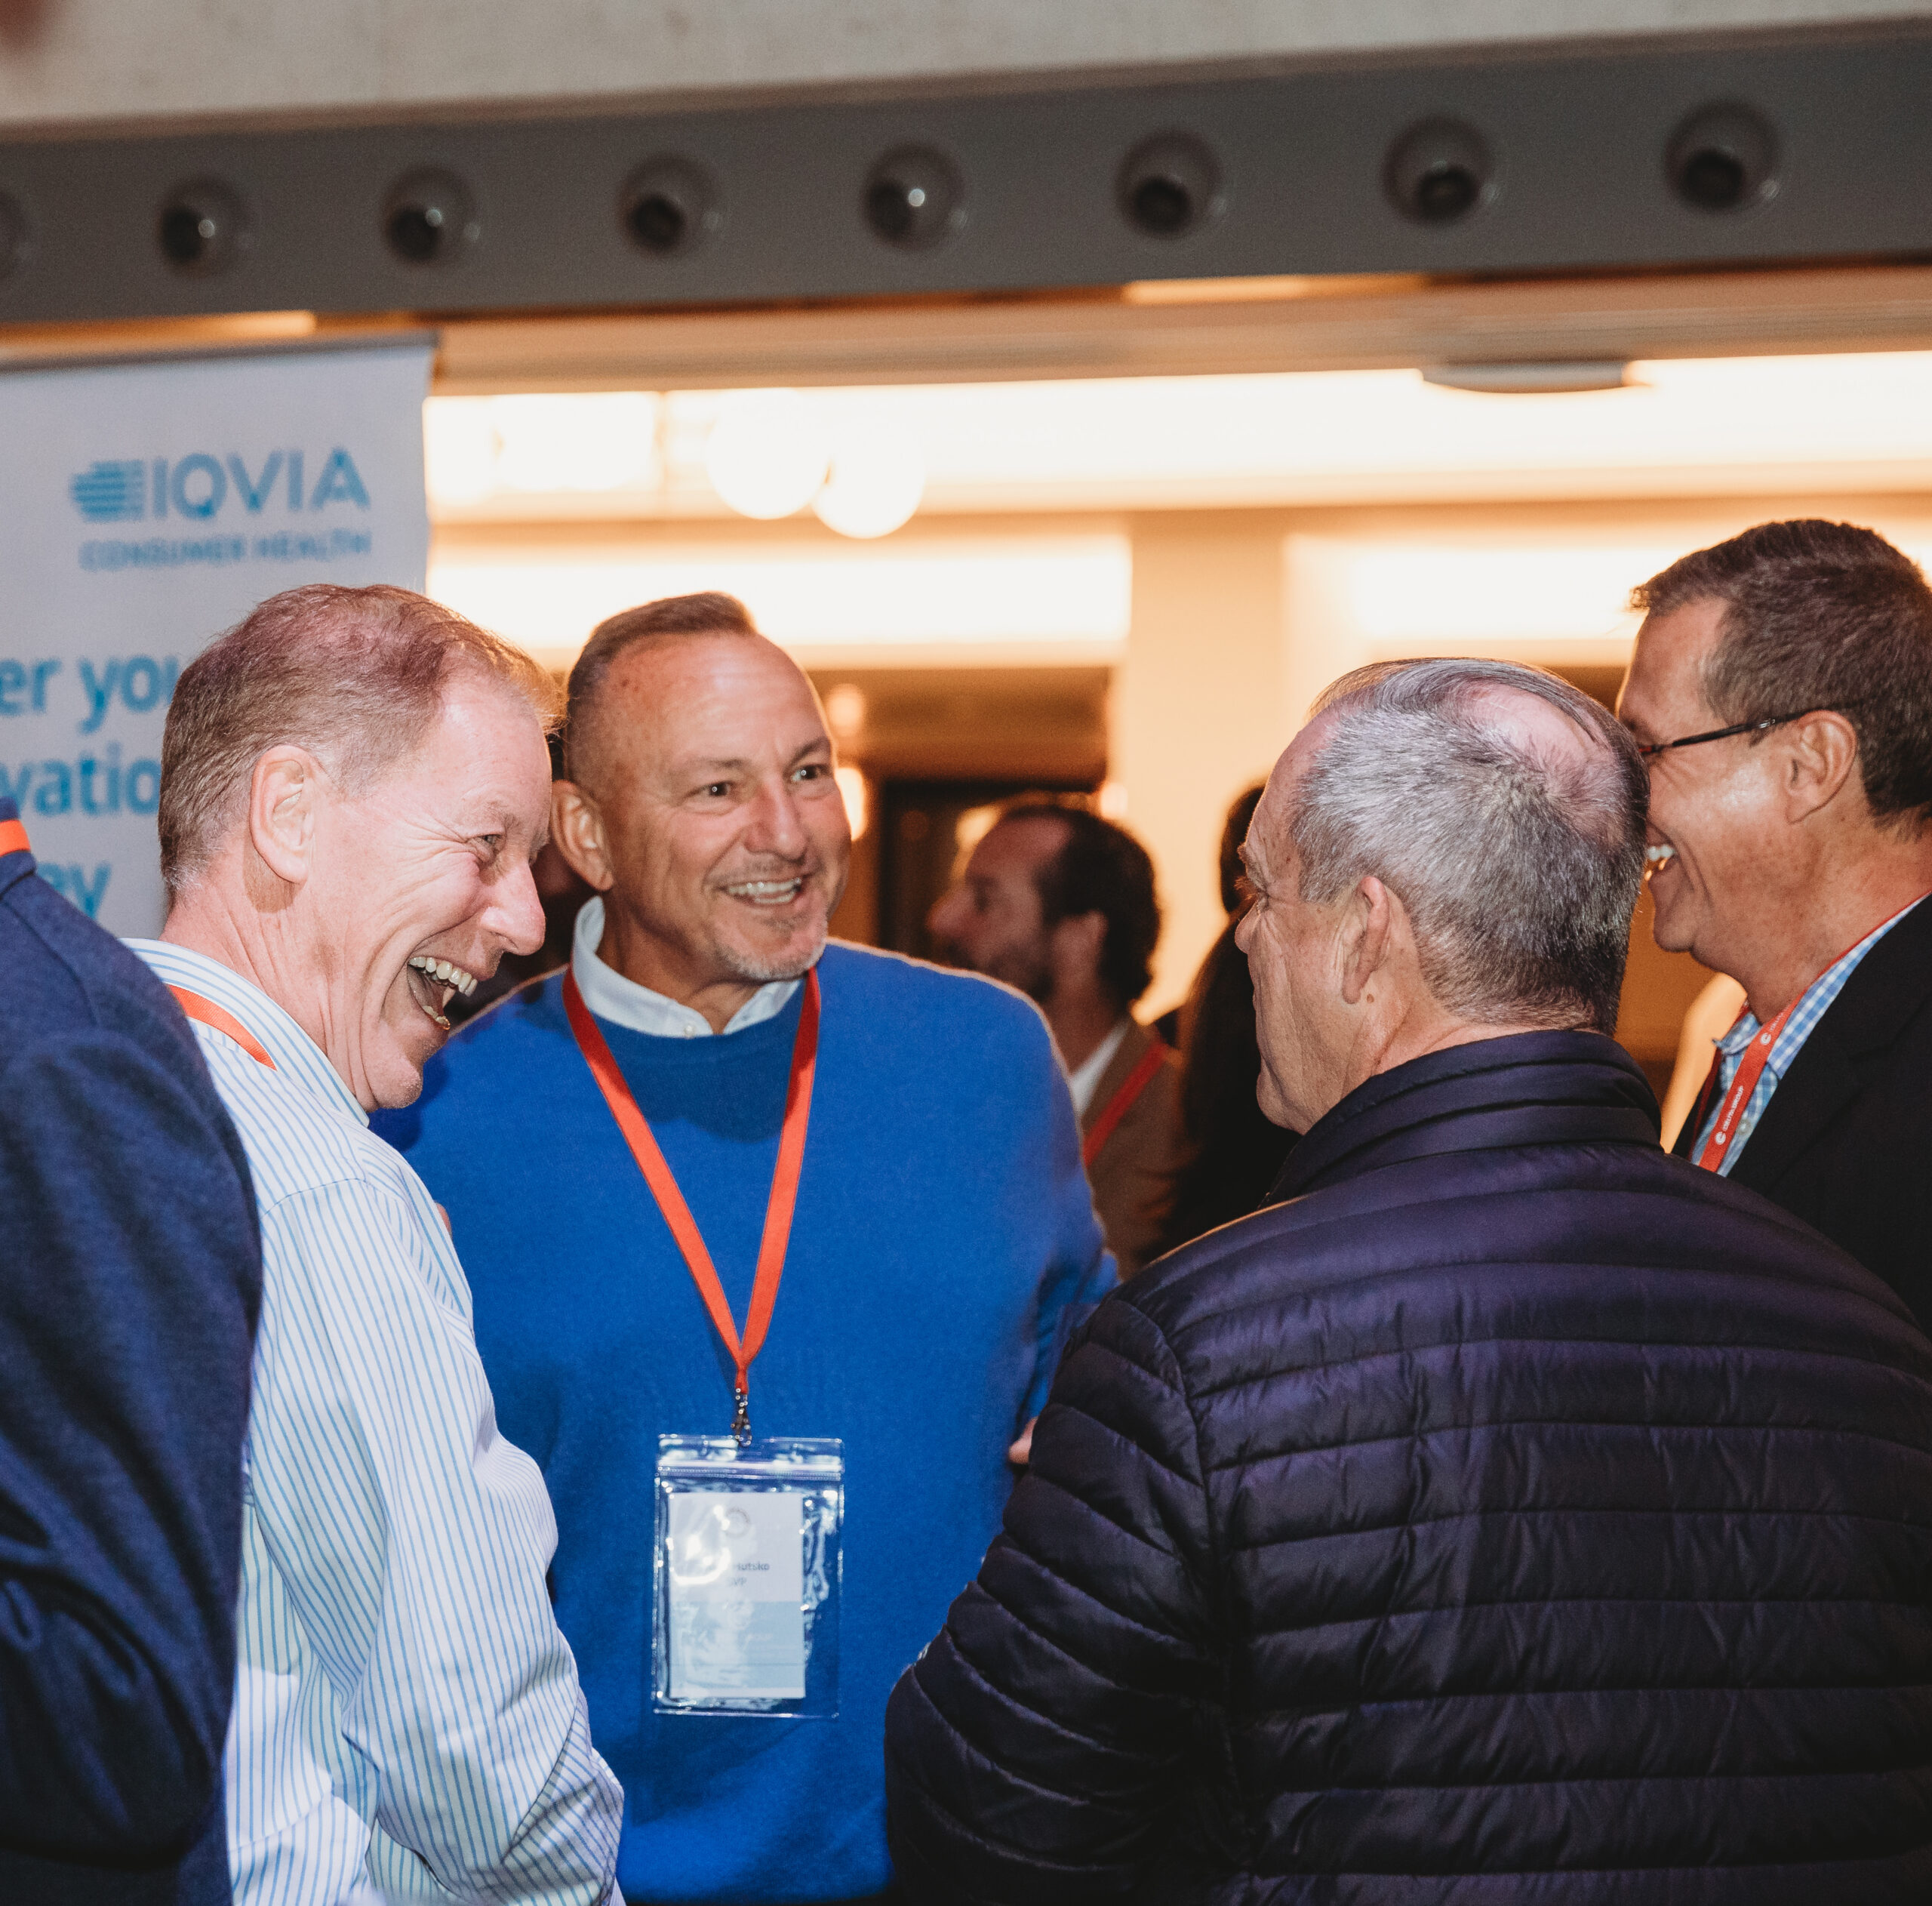 A group of professionals networking at the Ceuta International Conference